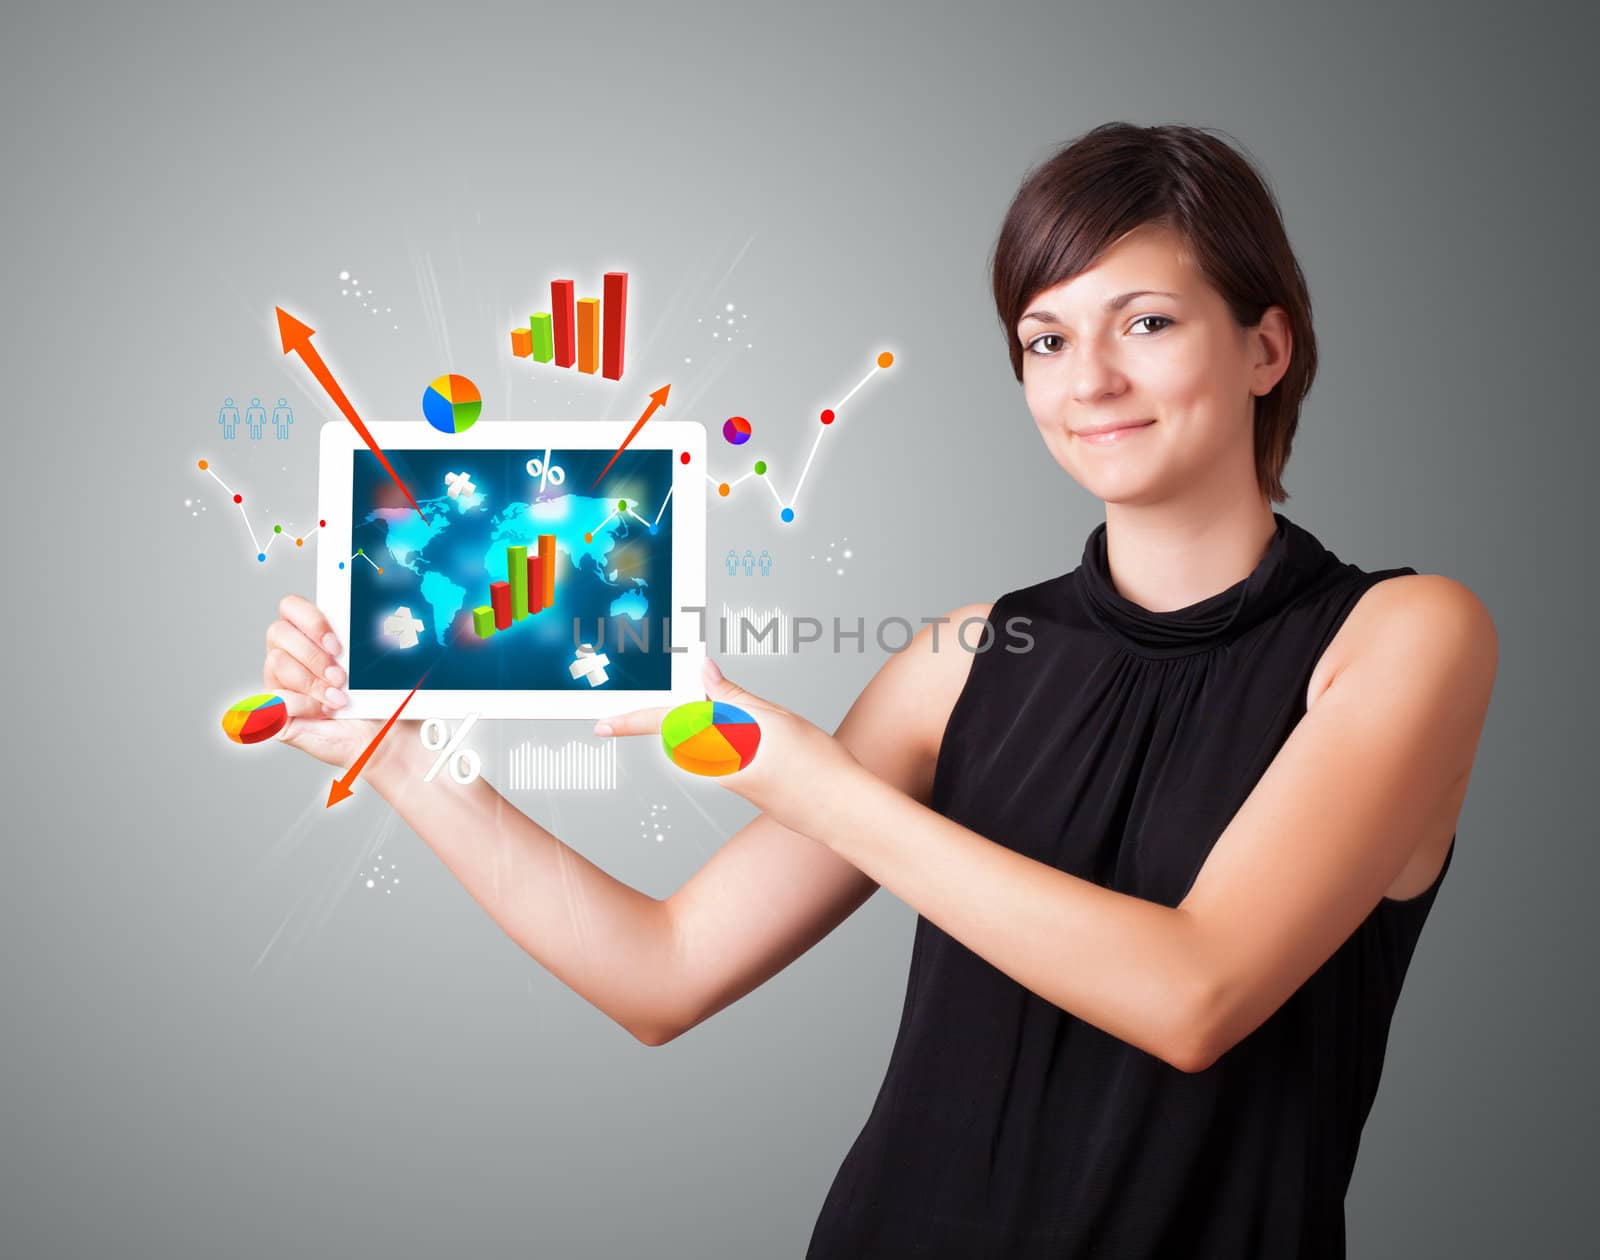 beutiful woman holding modern tablet with colorful diagrams and graphs